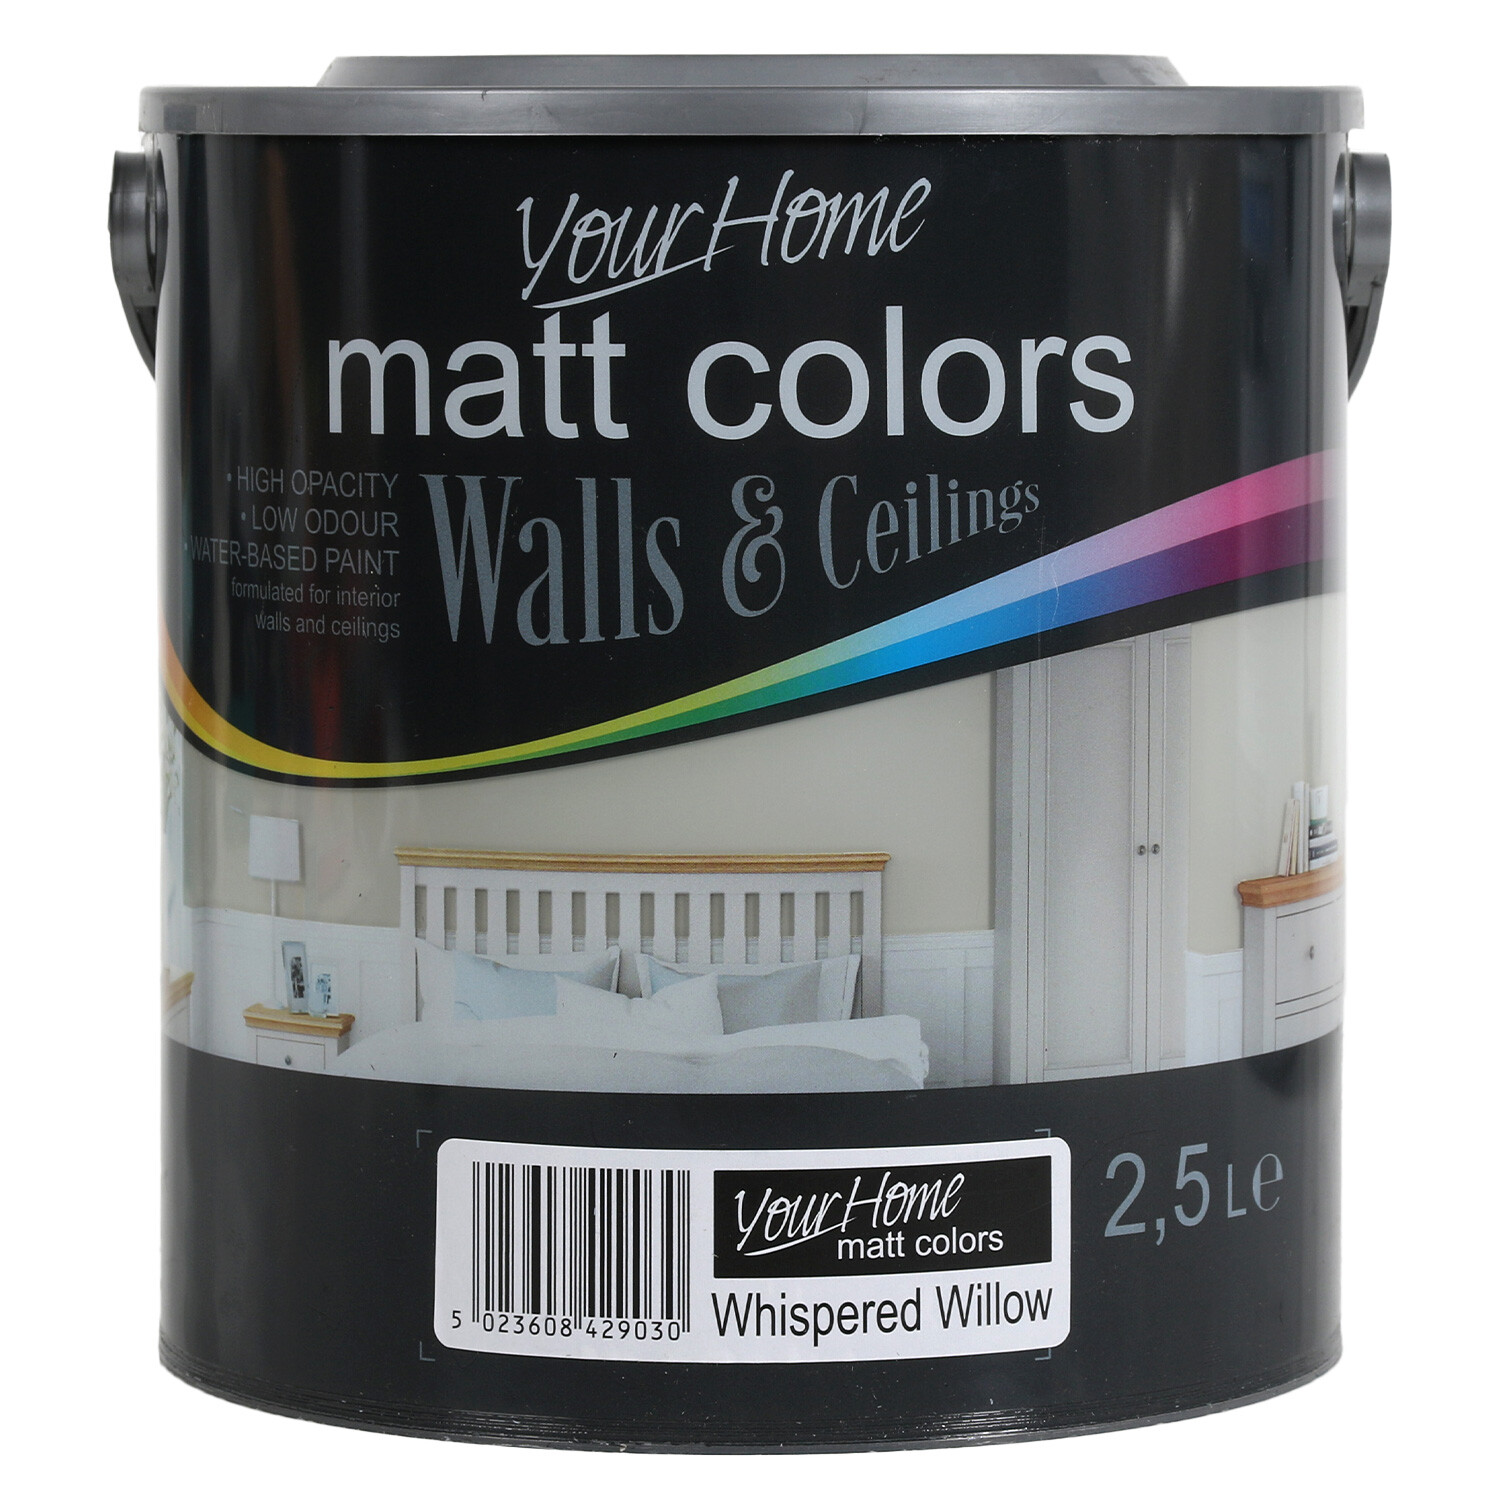 Your Home Walls & Ceilings Whispered Willow Matt Emulsion Paint 2.5L Image 1